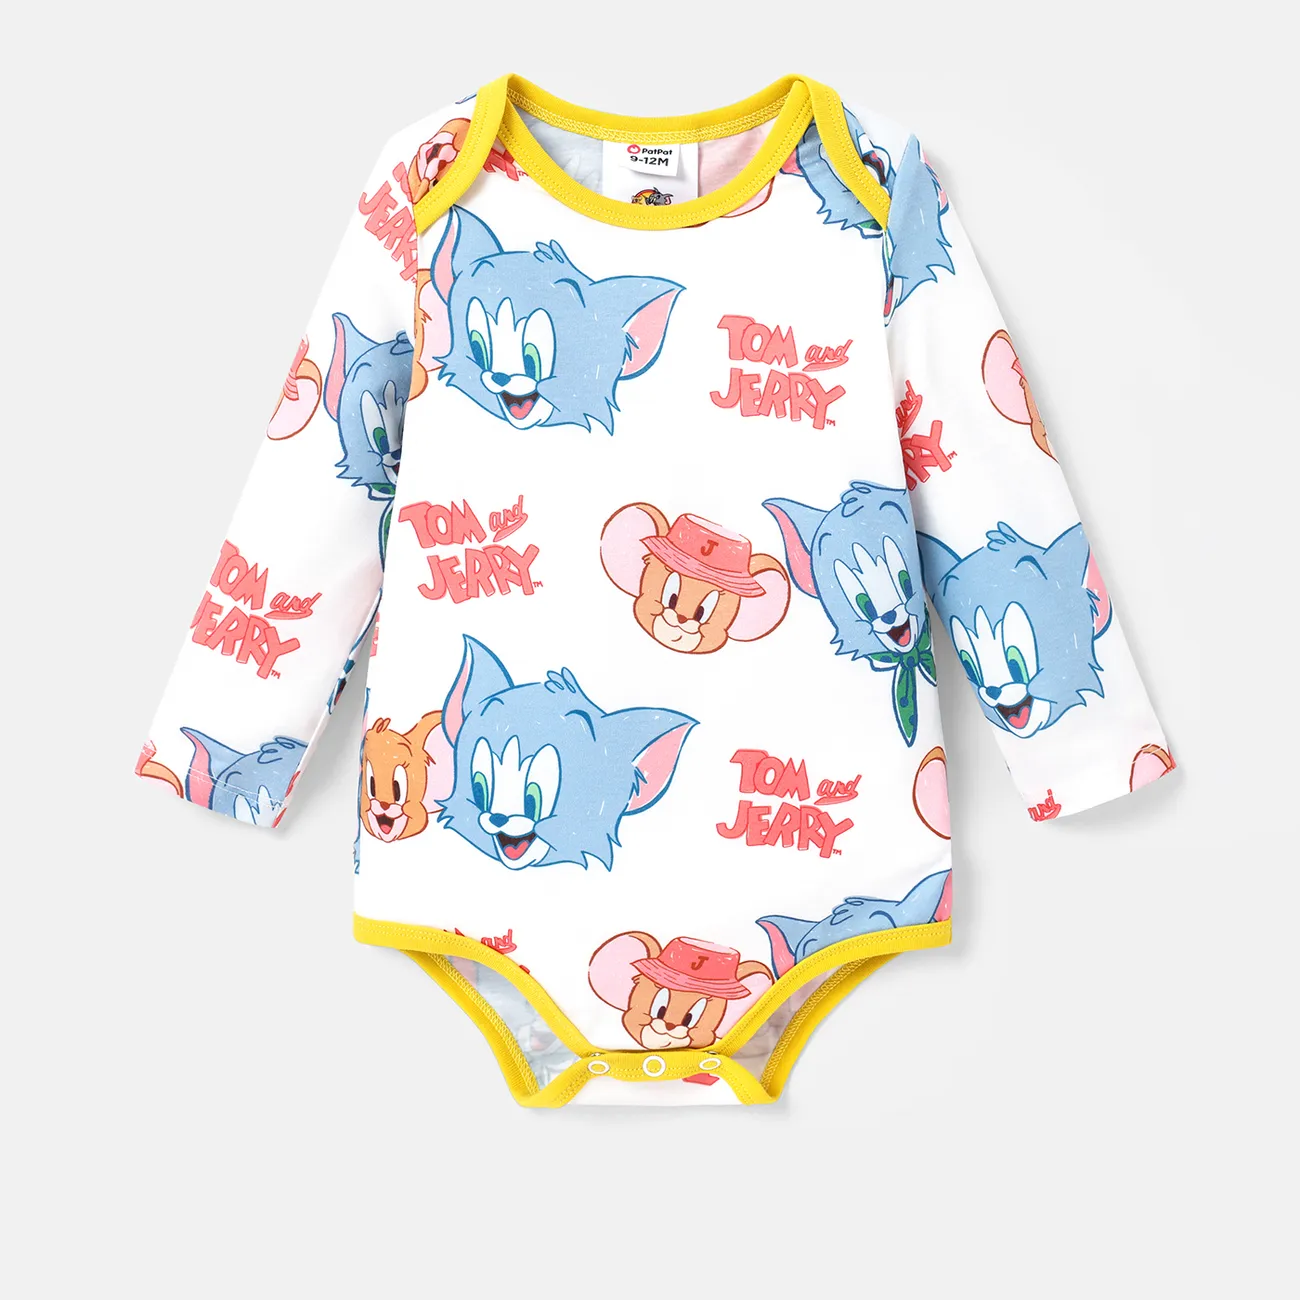 Tom and Jerry Baby Boy Naia™ Character Print Onesies / Pants  White big image 1